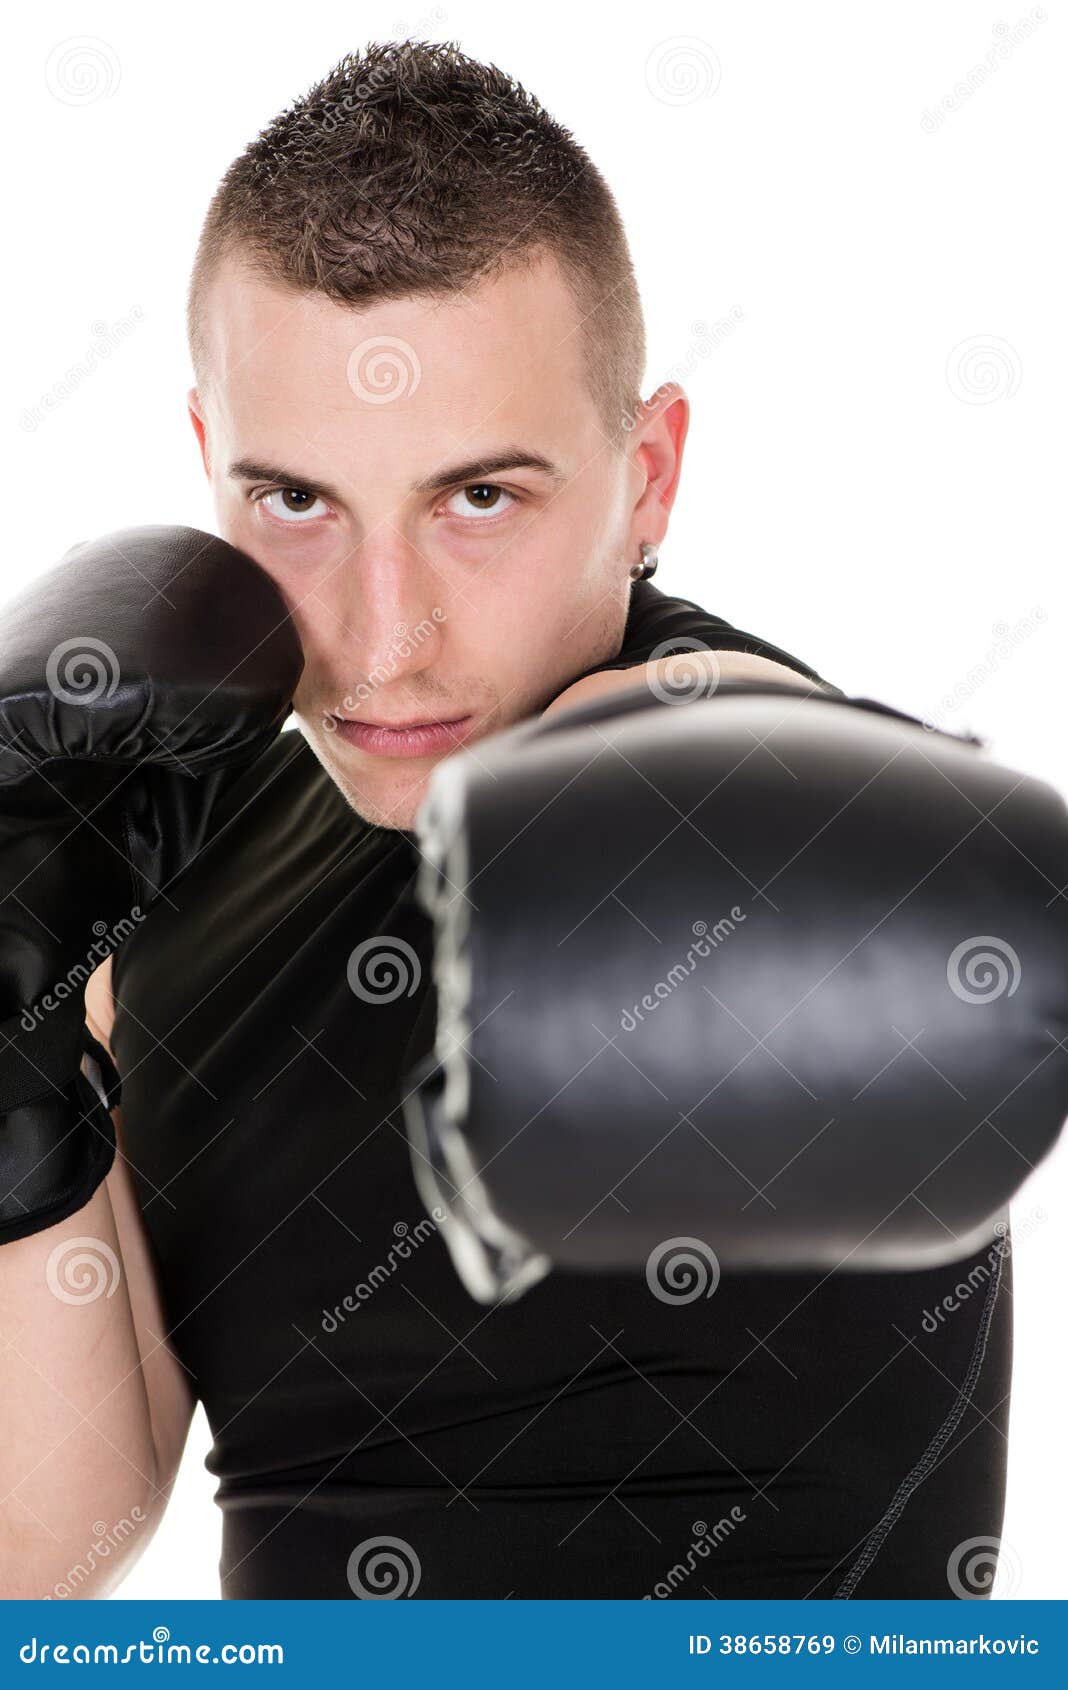 Direct punch stock image. Image of hand, defending, human - 38658769